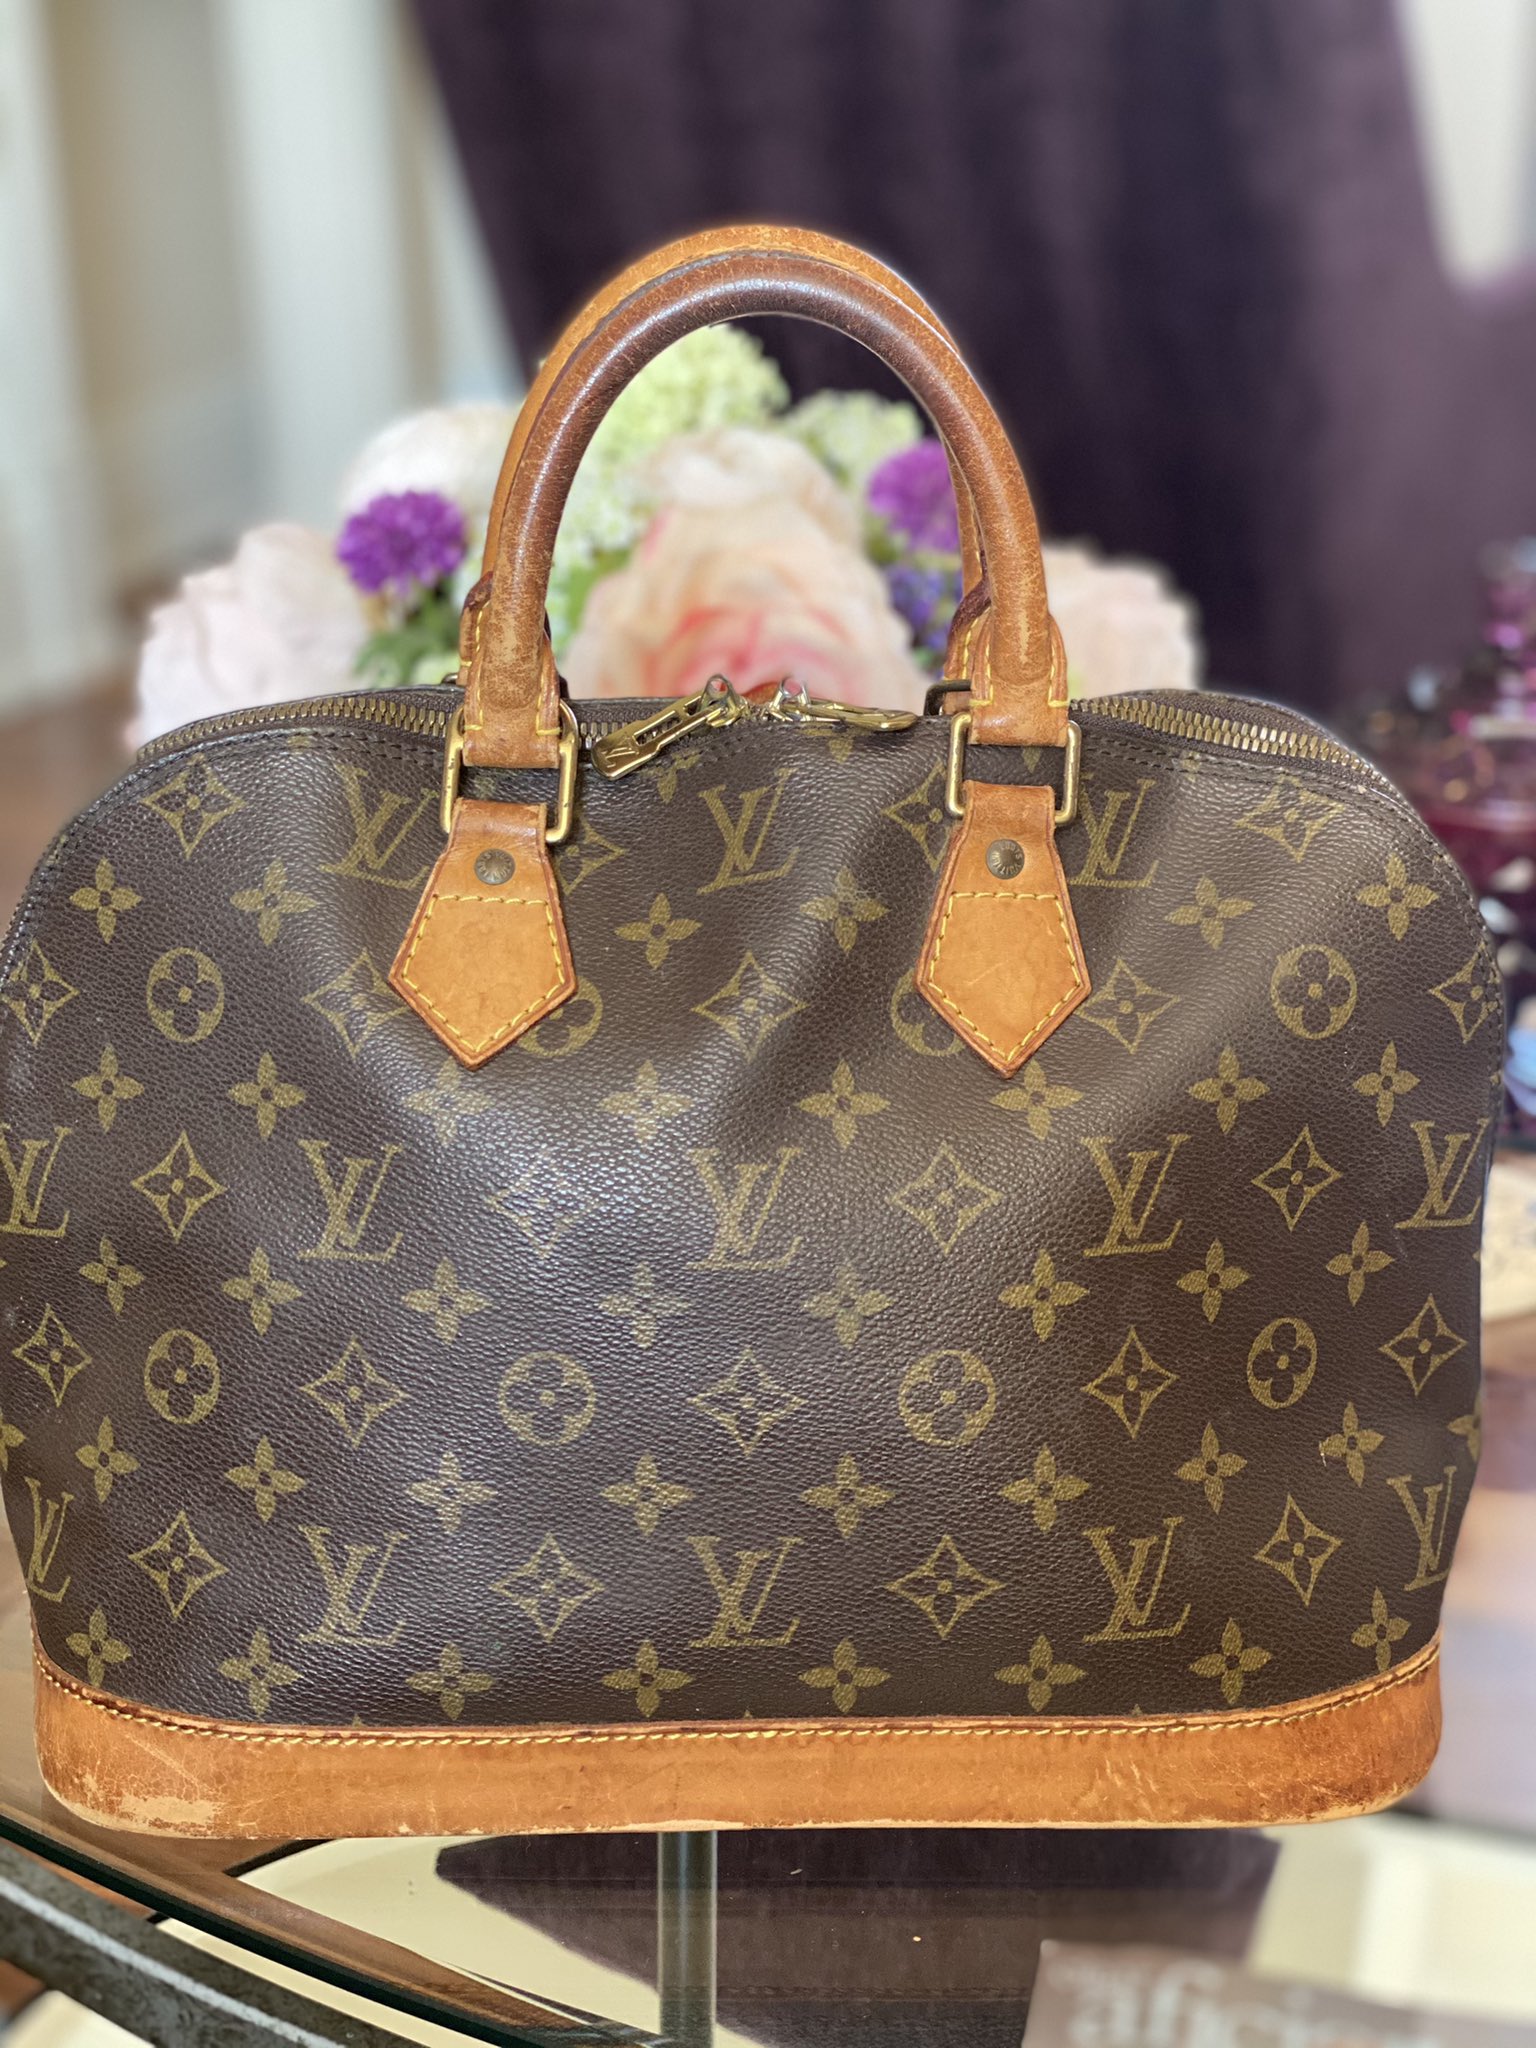 reLoved handbags on X: Here's a vintage Louis Vuitton Alma that I'm  redoing in black. Just putting the finishing touches on ❤️   / X